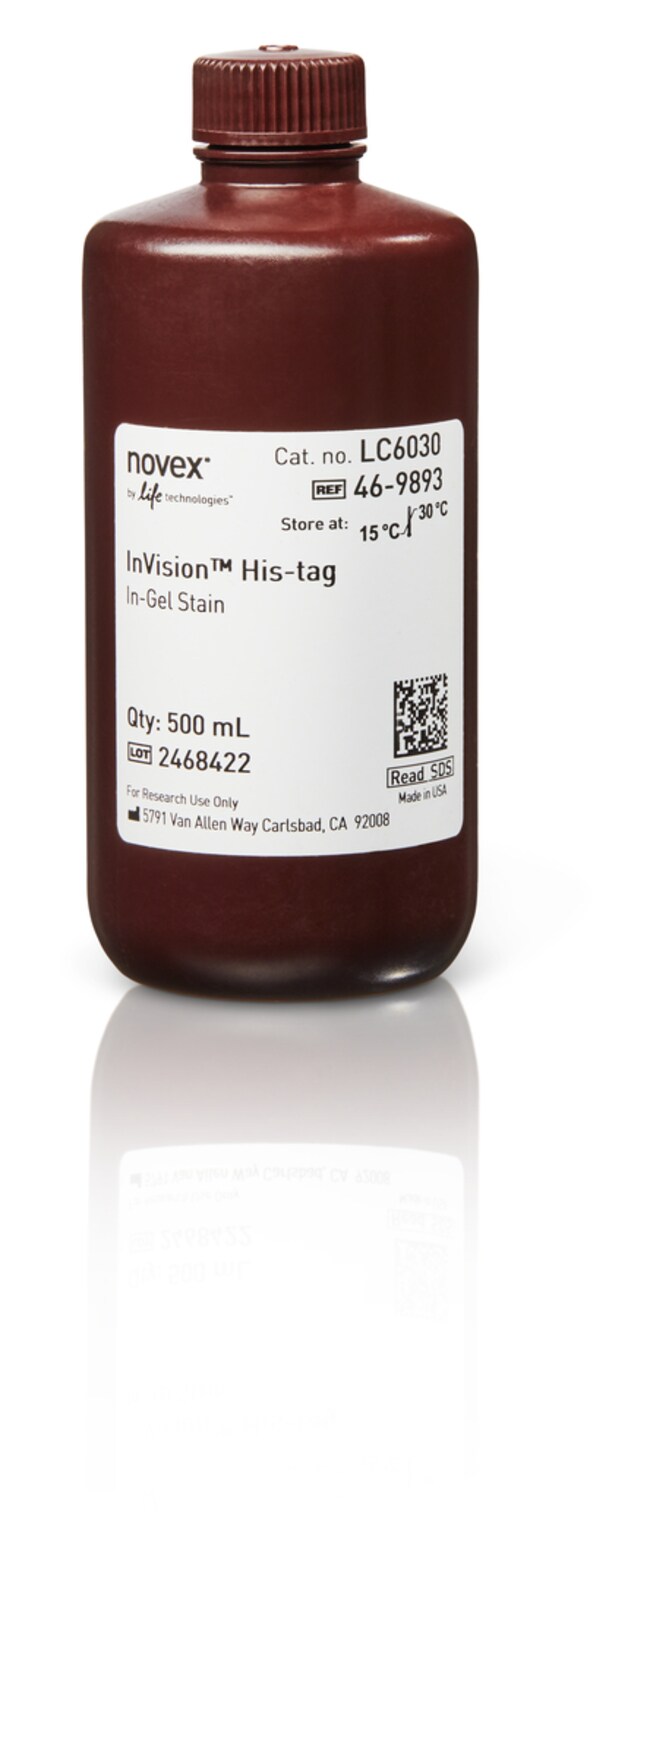 InVision&trade; His-Tag In-Gel Stain